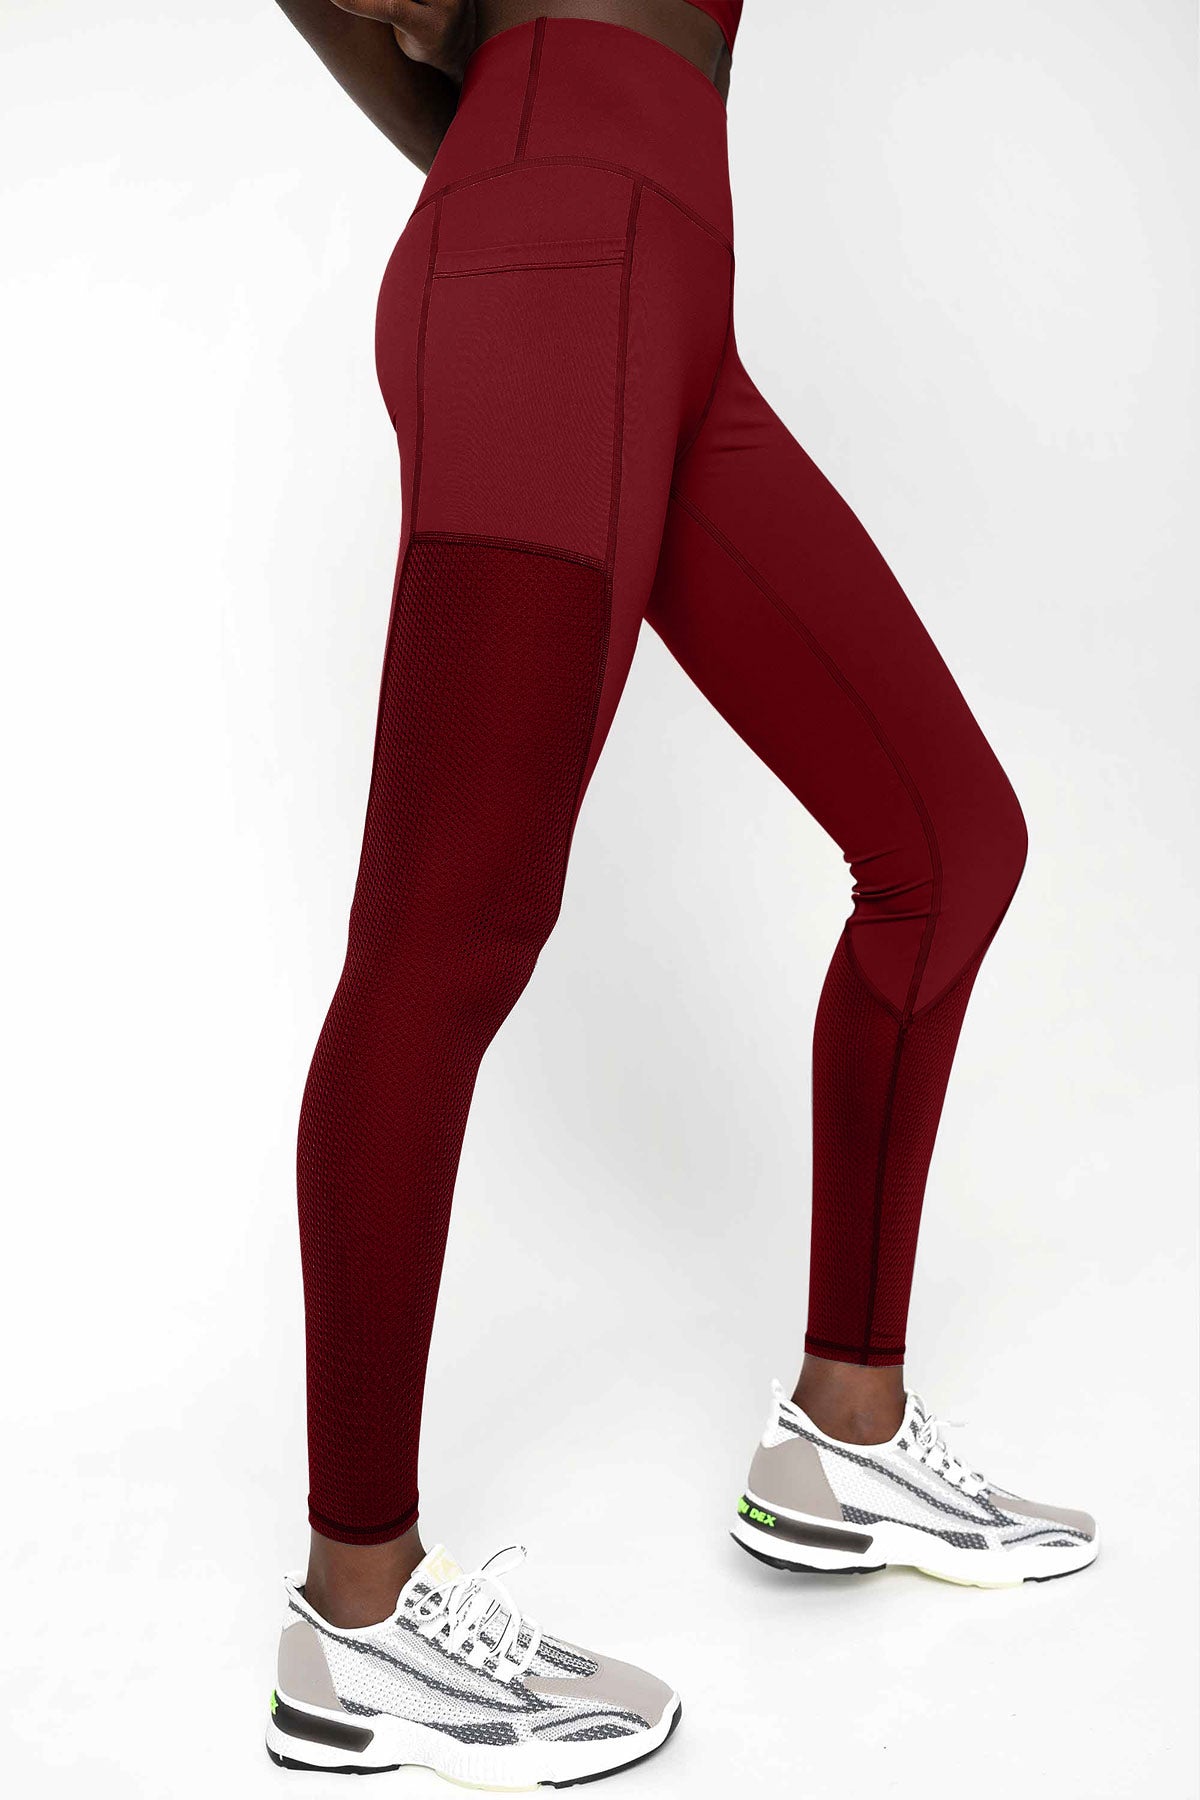 SEMI-ANNUAL SALE! Maroon Red Cassi Mesh & Pockets Workout Leggings Yoga Pants - Women - Pineapple Clothing